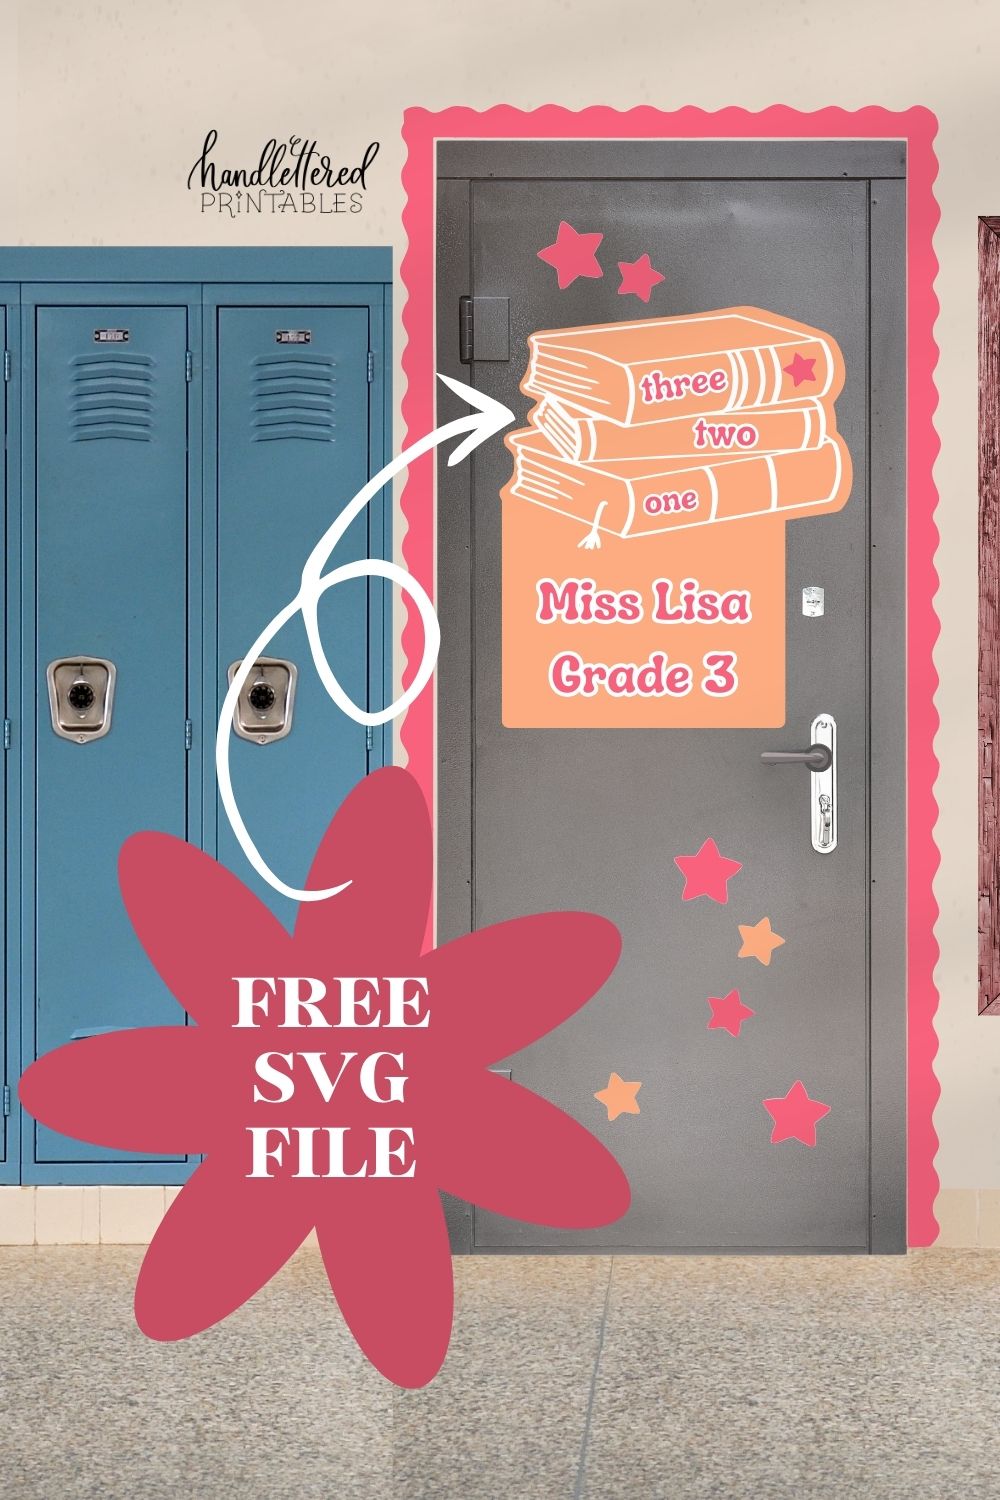 Stack of books free SVG file used on classroom door decor text overlay reads 'free SVG file'